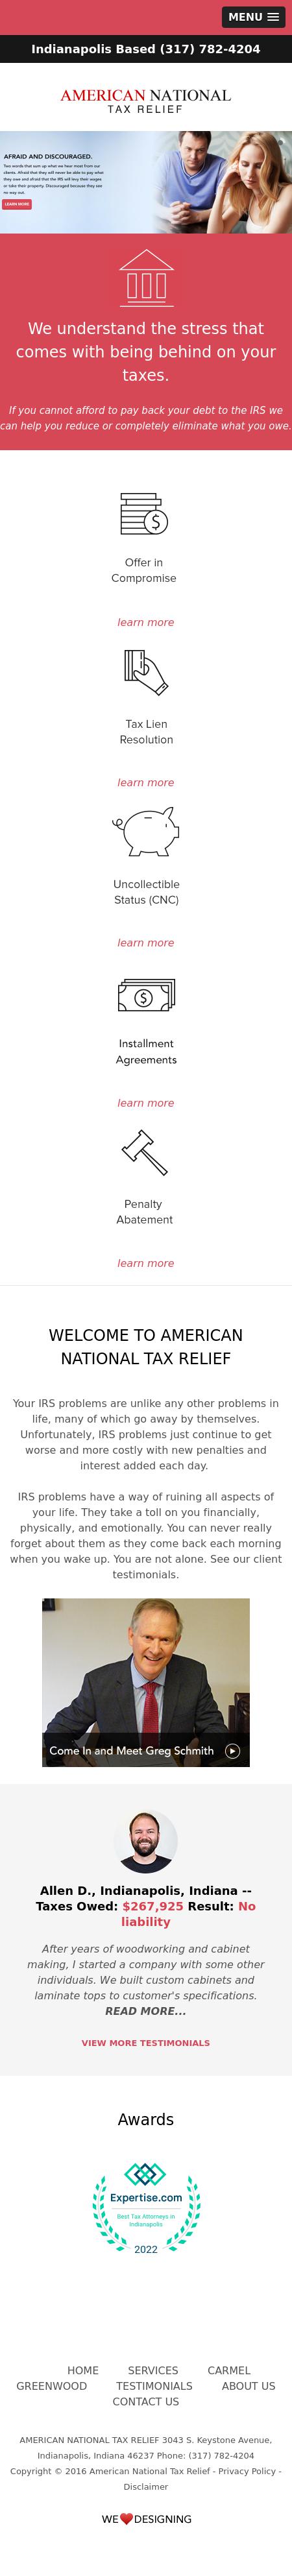 American National Tax Relief - Indianapolis IN Lawyers